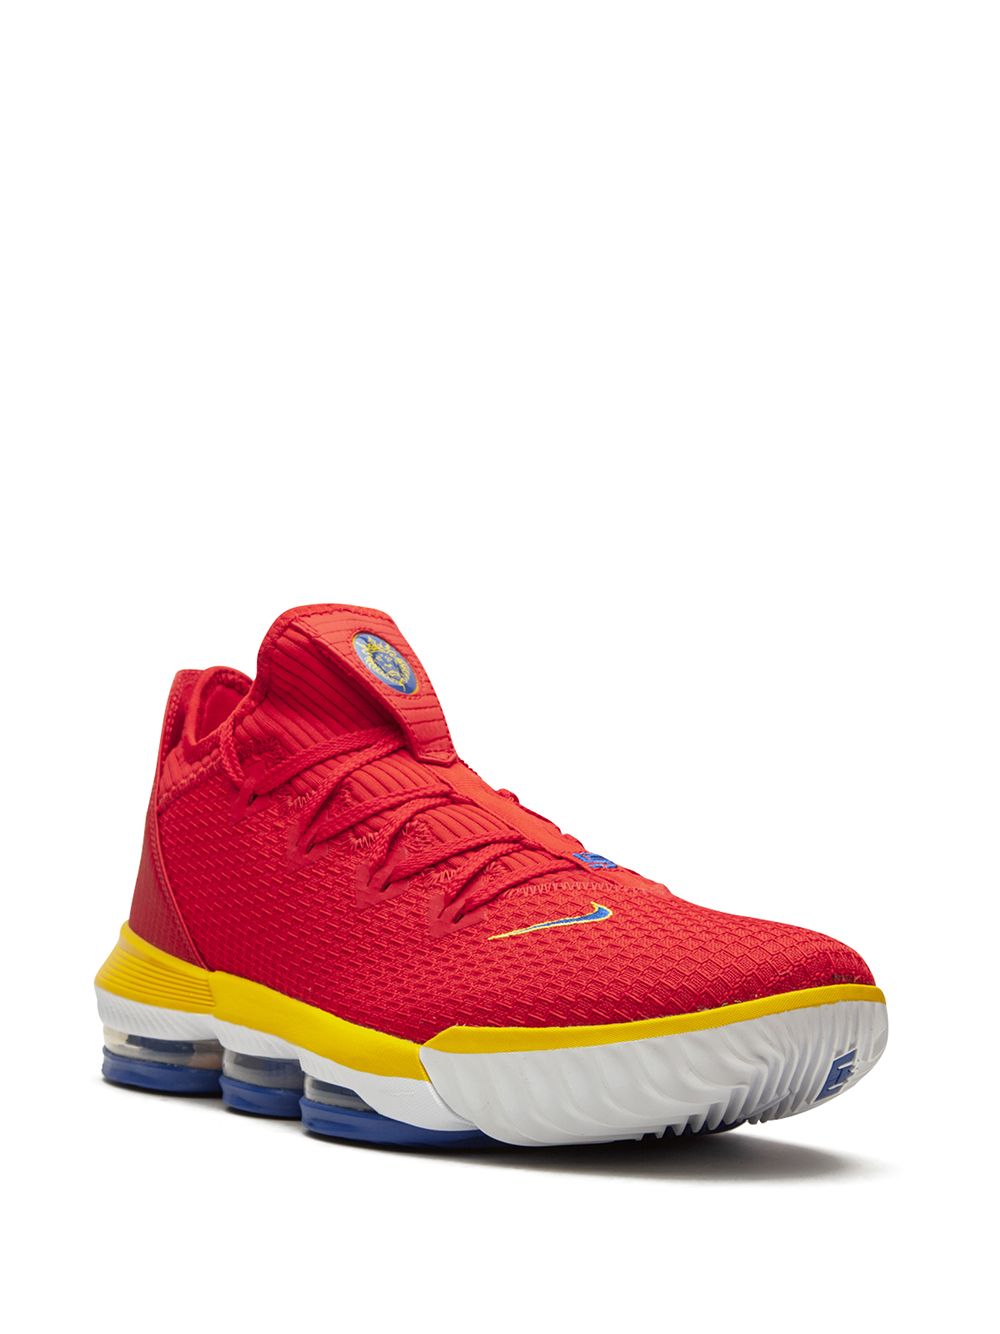 Shop red Nike LeBron 16 Low sneakers 